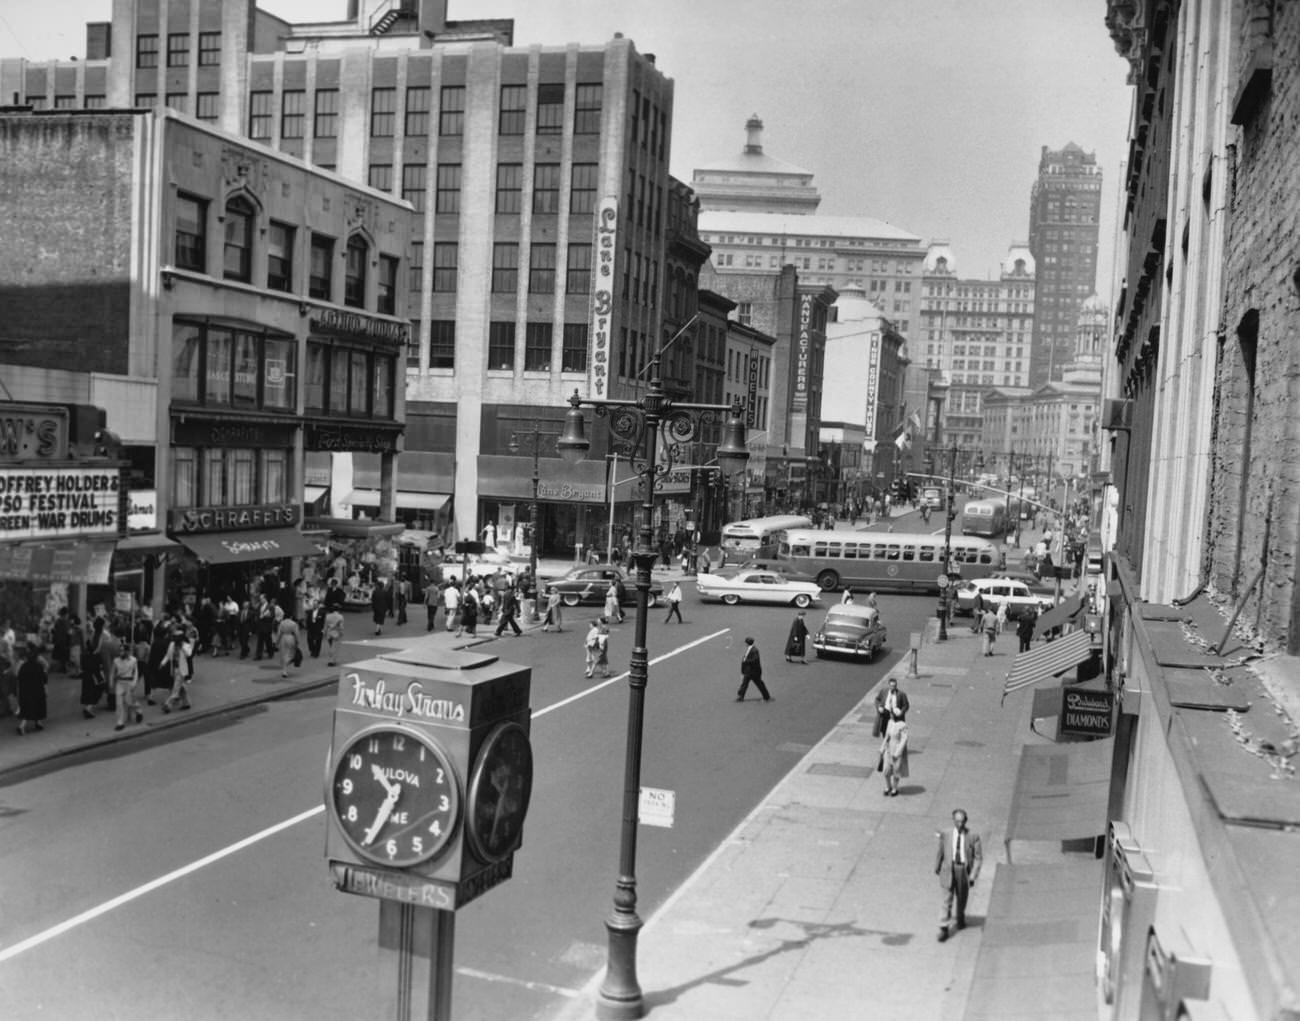 View Of 'Department Store Row' On Fulton Street Towards Borough Hall, Brooklyn, 1957.